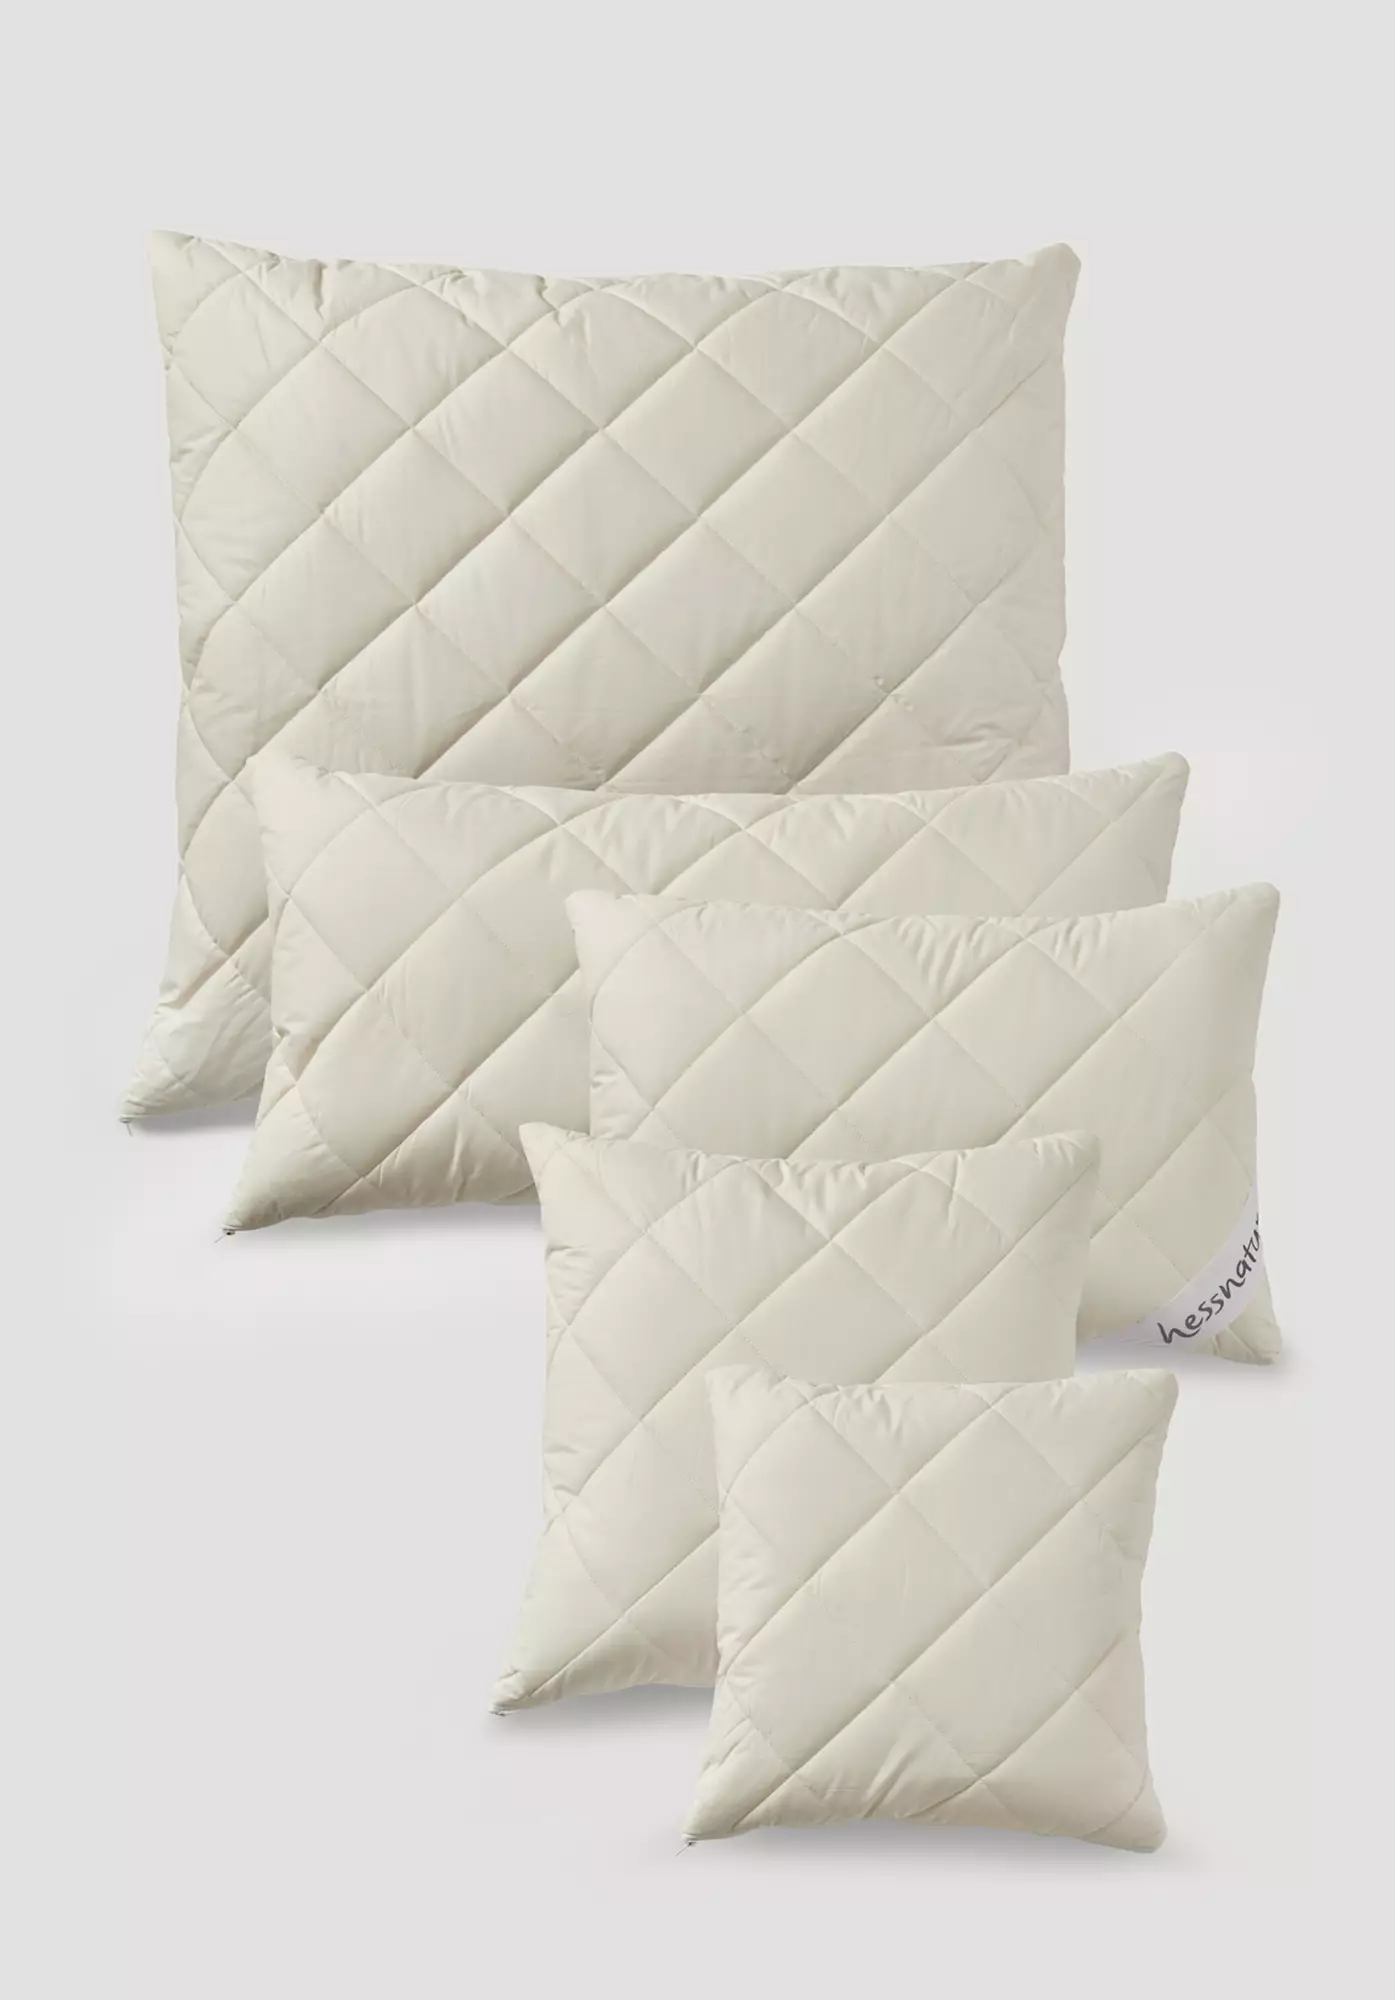 Pillows made from pure organic cotton - 0